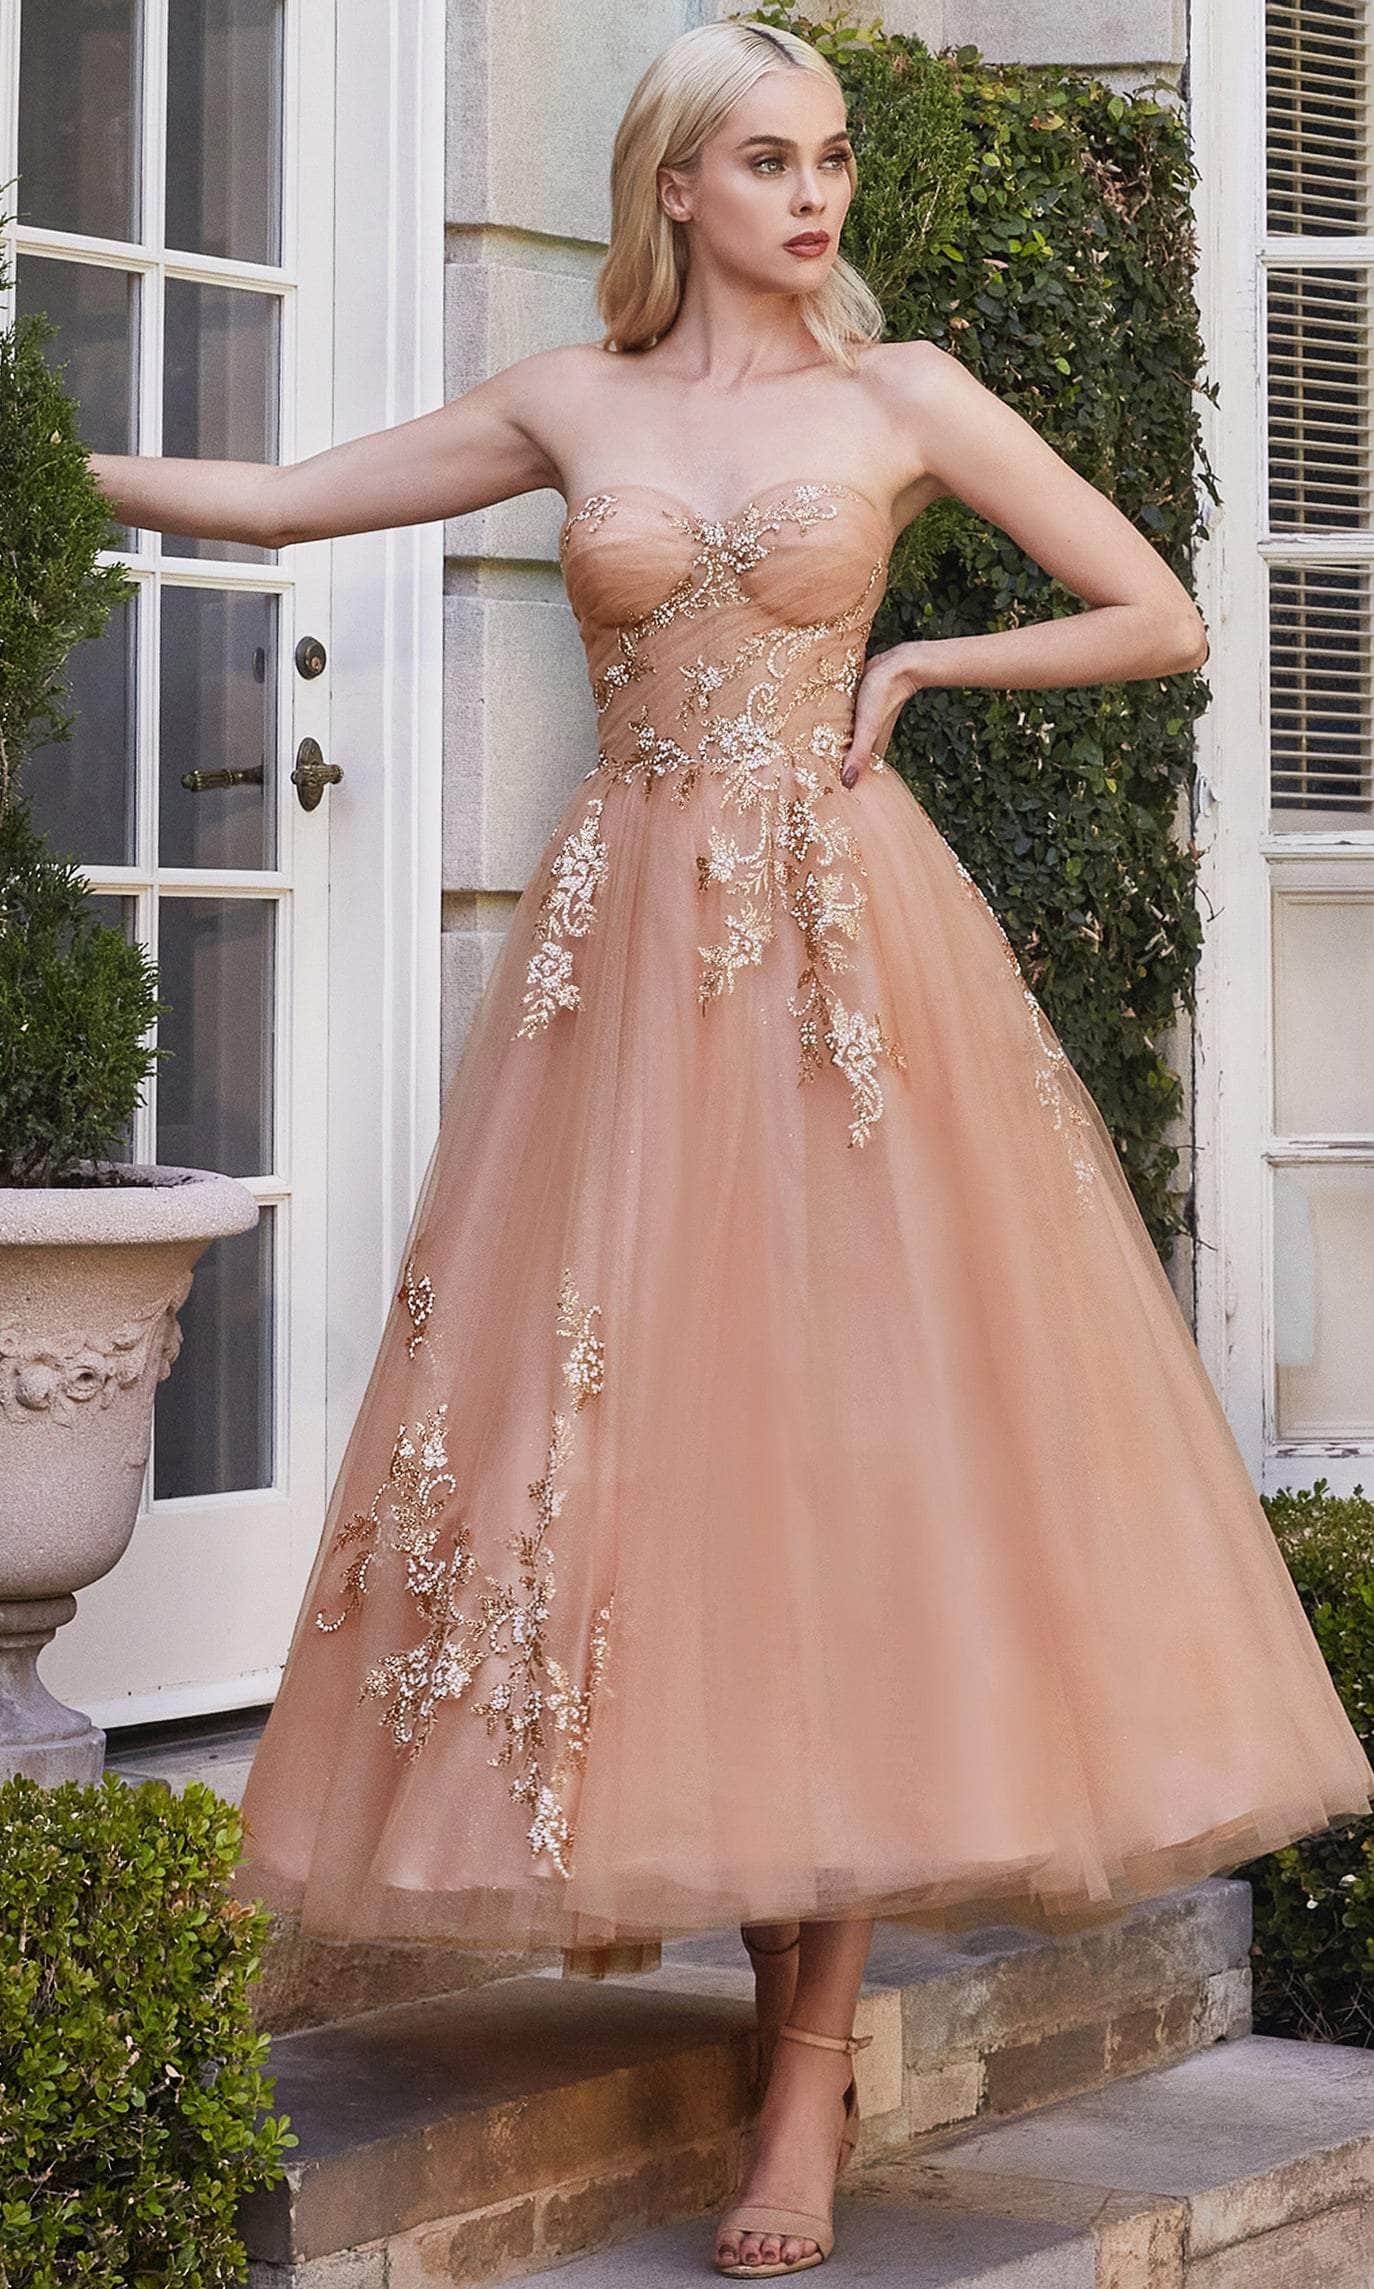 Andrea and Leo A1114 - Tea Length Tulle A-Line Dress Prom Dresses 2 / Rose Gold